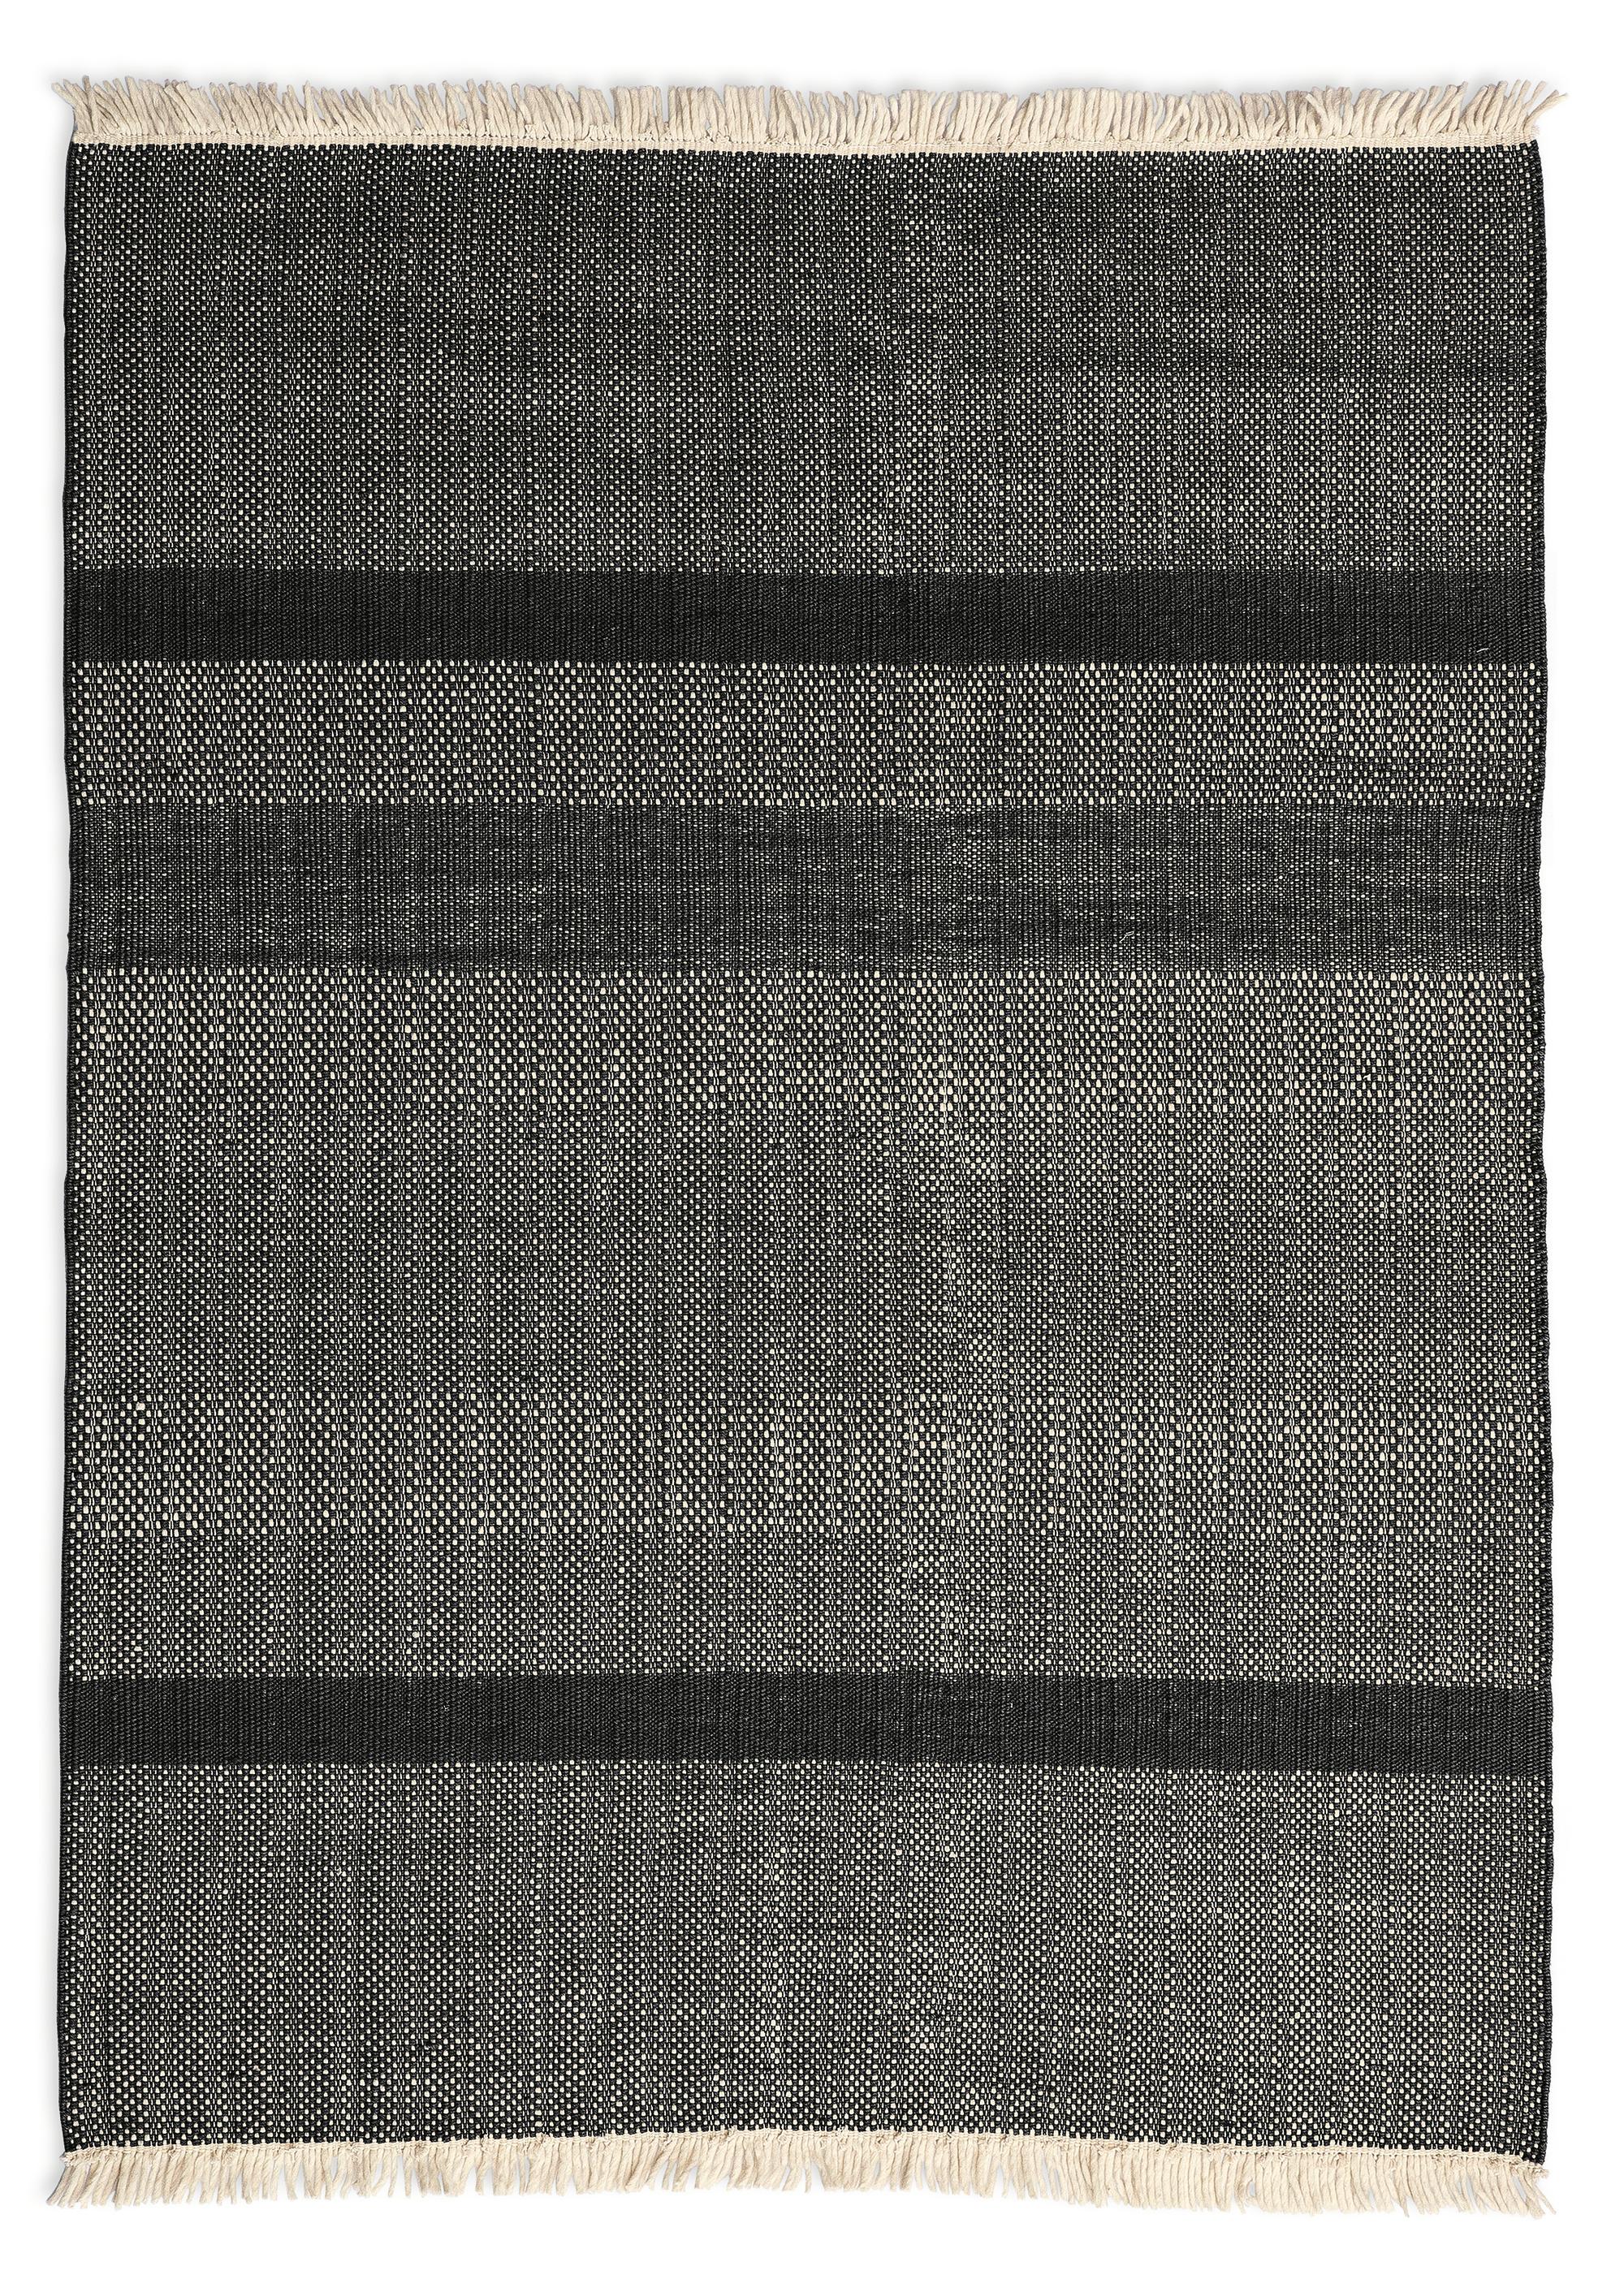 Small 'Tres Texture' Hand-Loomed Rug for Nanimarquina For Sale 1